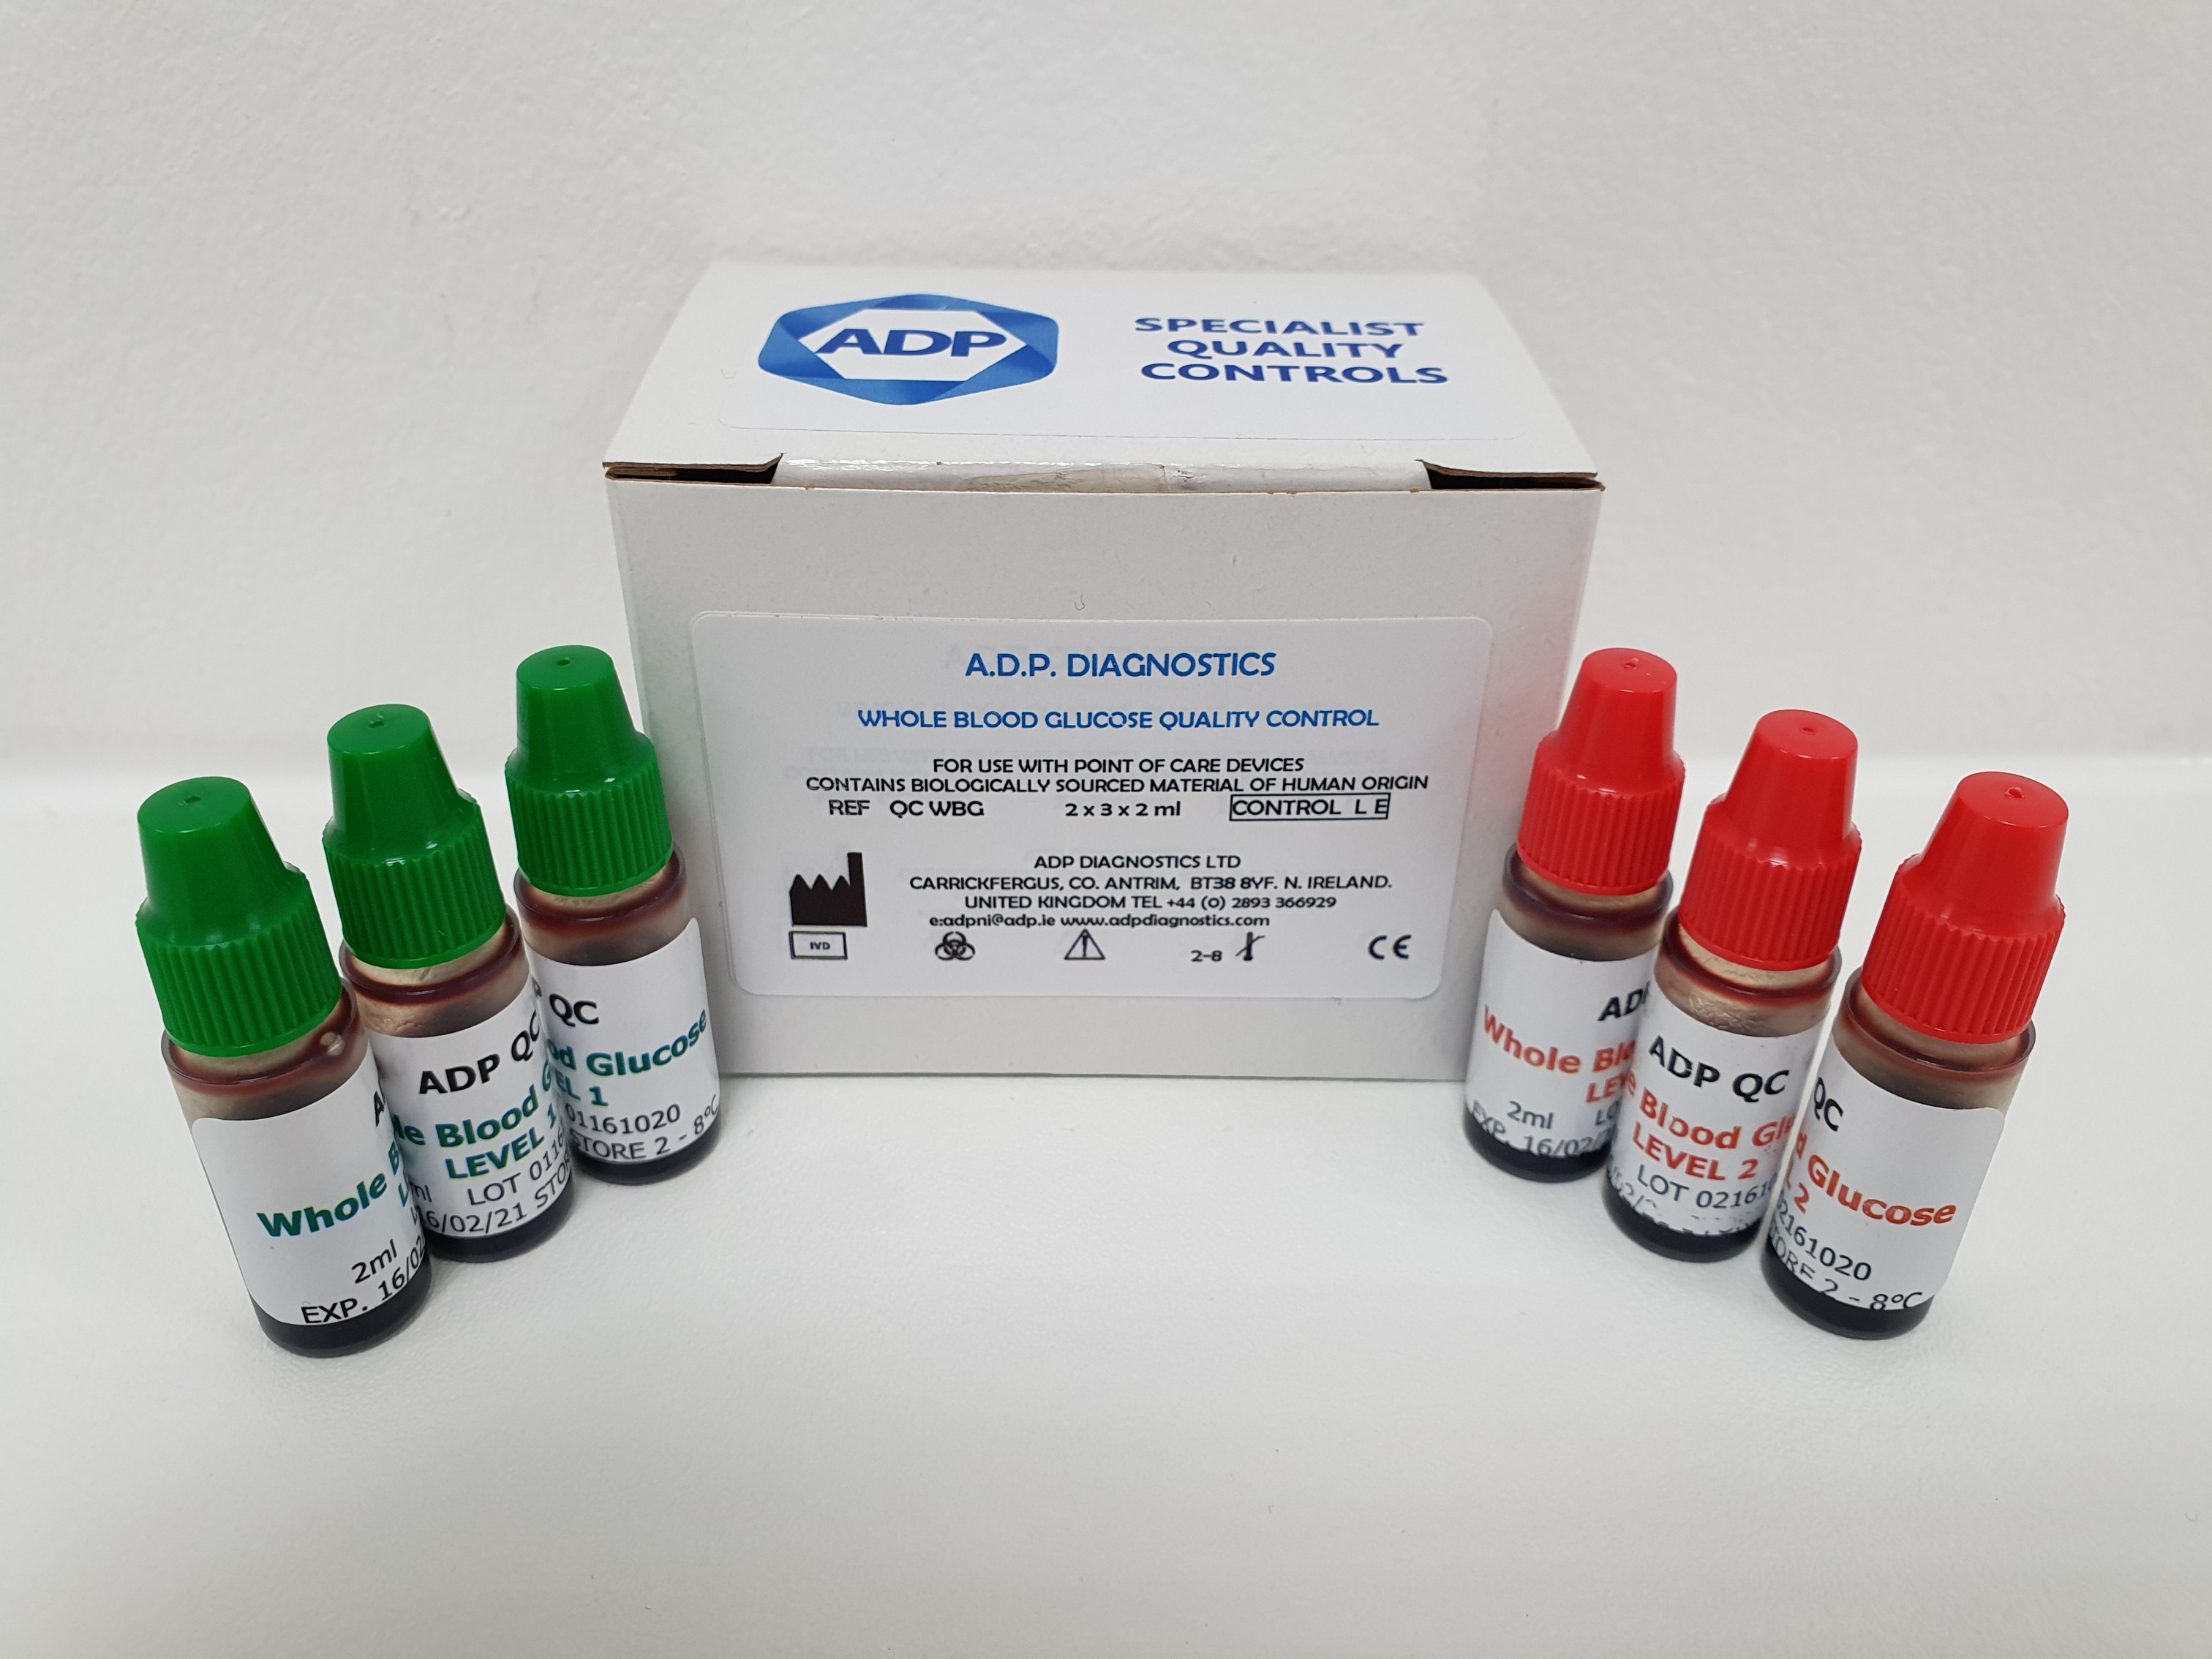 ADP Diagnostics Launches World’s First Whole Blood Glucose Quality Control